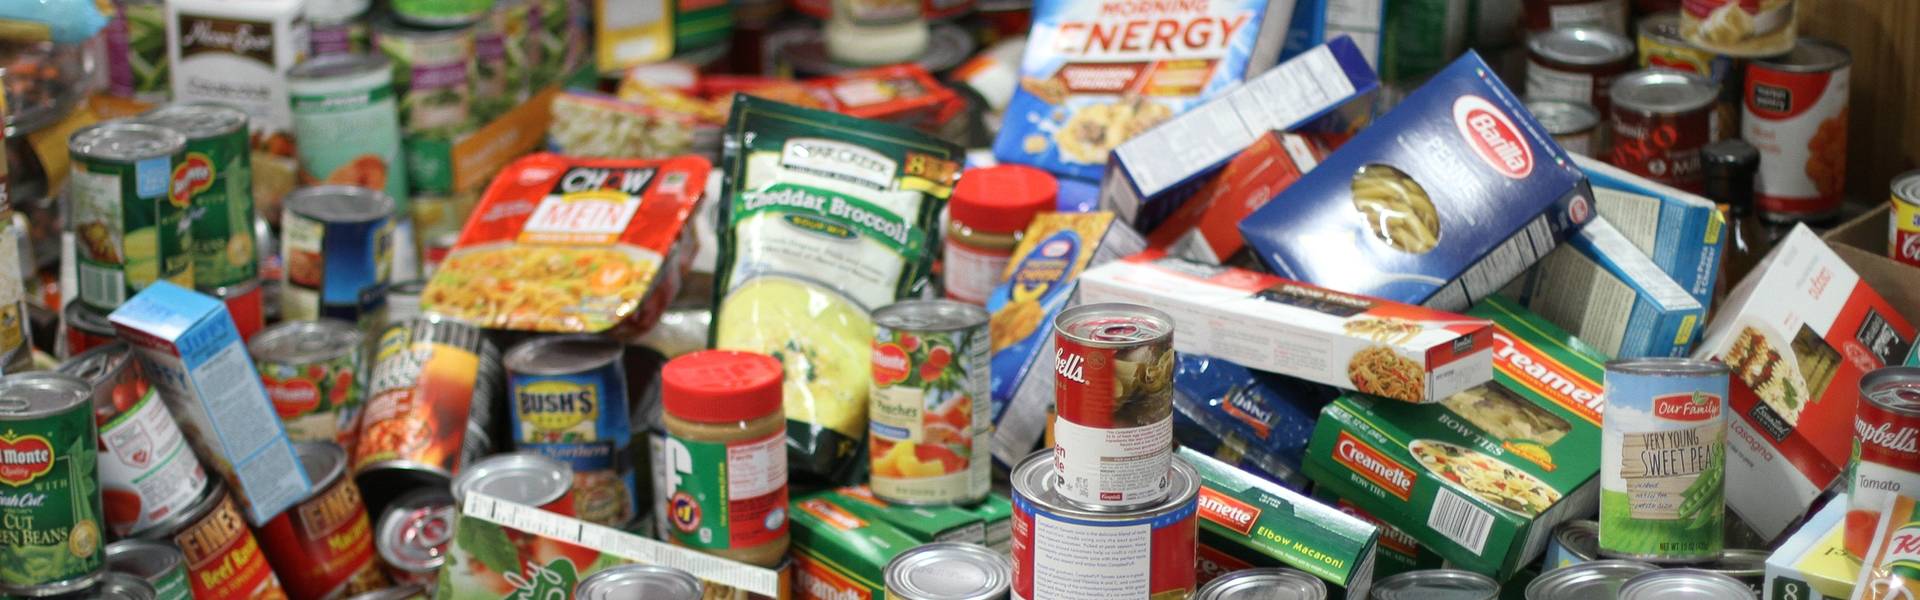 Food pile of donated cans and nonparishable foods